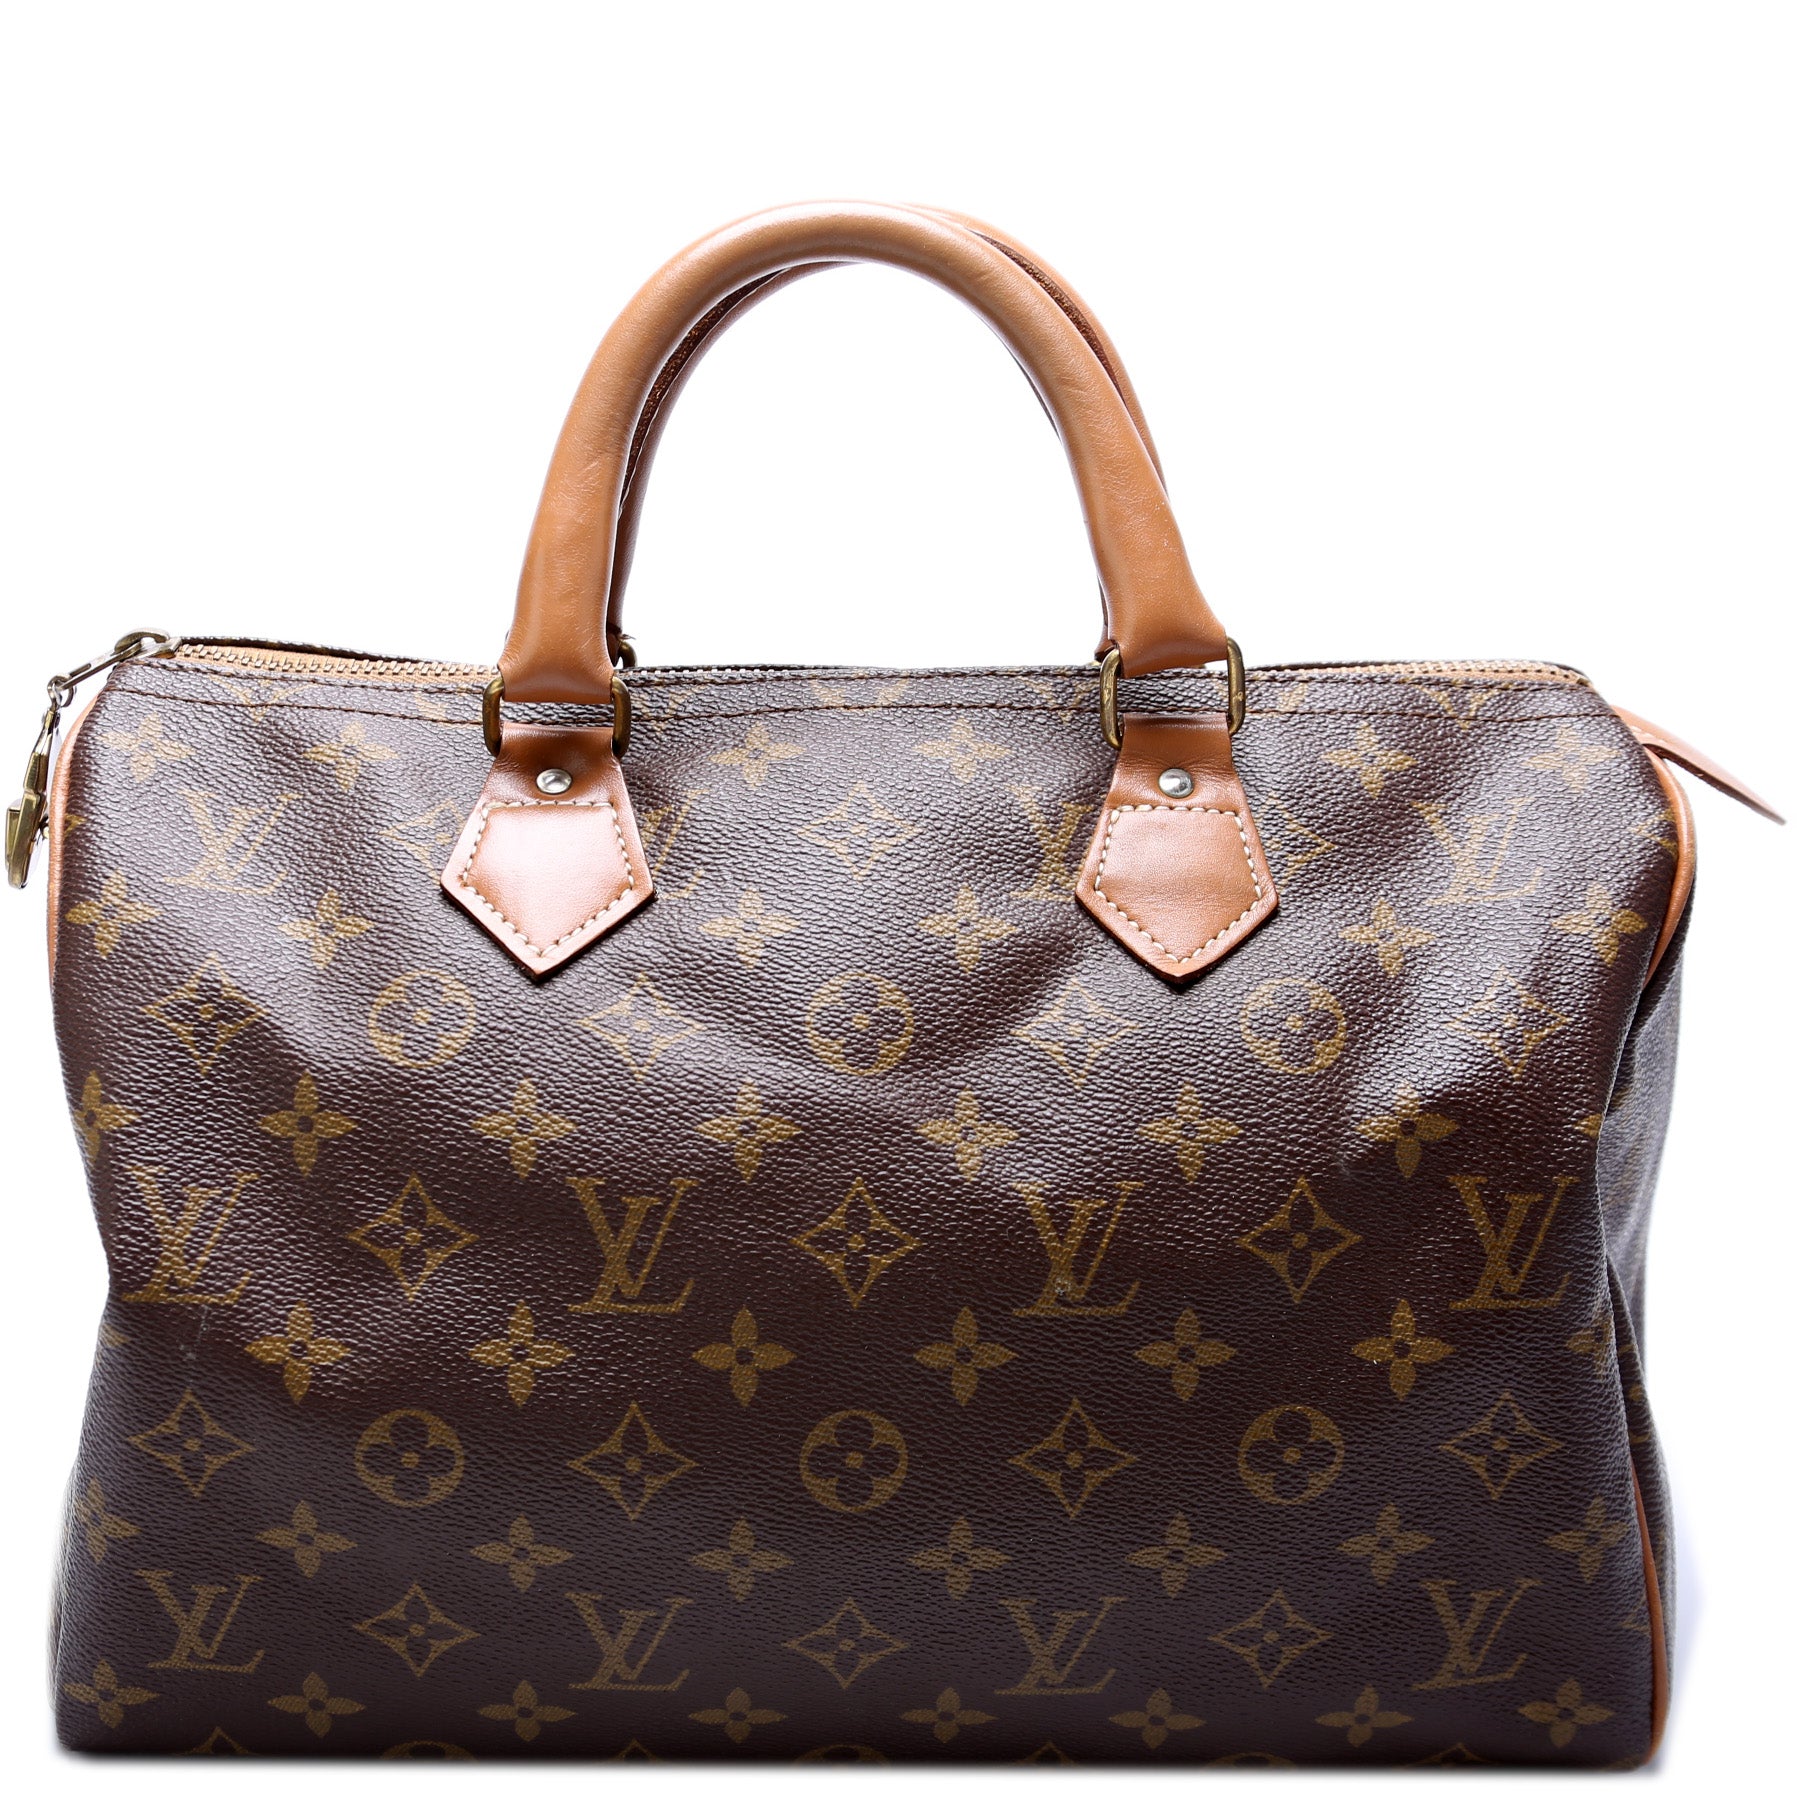 Authentic LOUIS VUITTON Speedy 25 Handbag Monogram Brown Vintage LV Pre  Owned Purse lv coated canvas Made in France